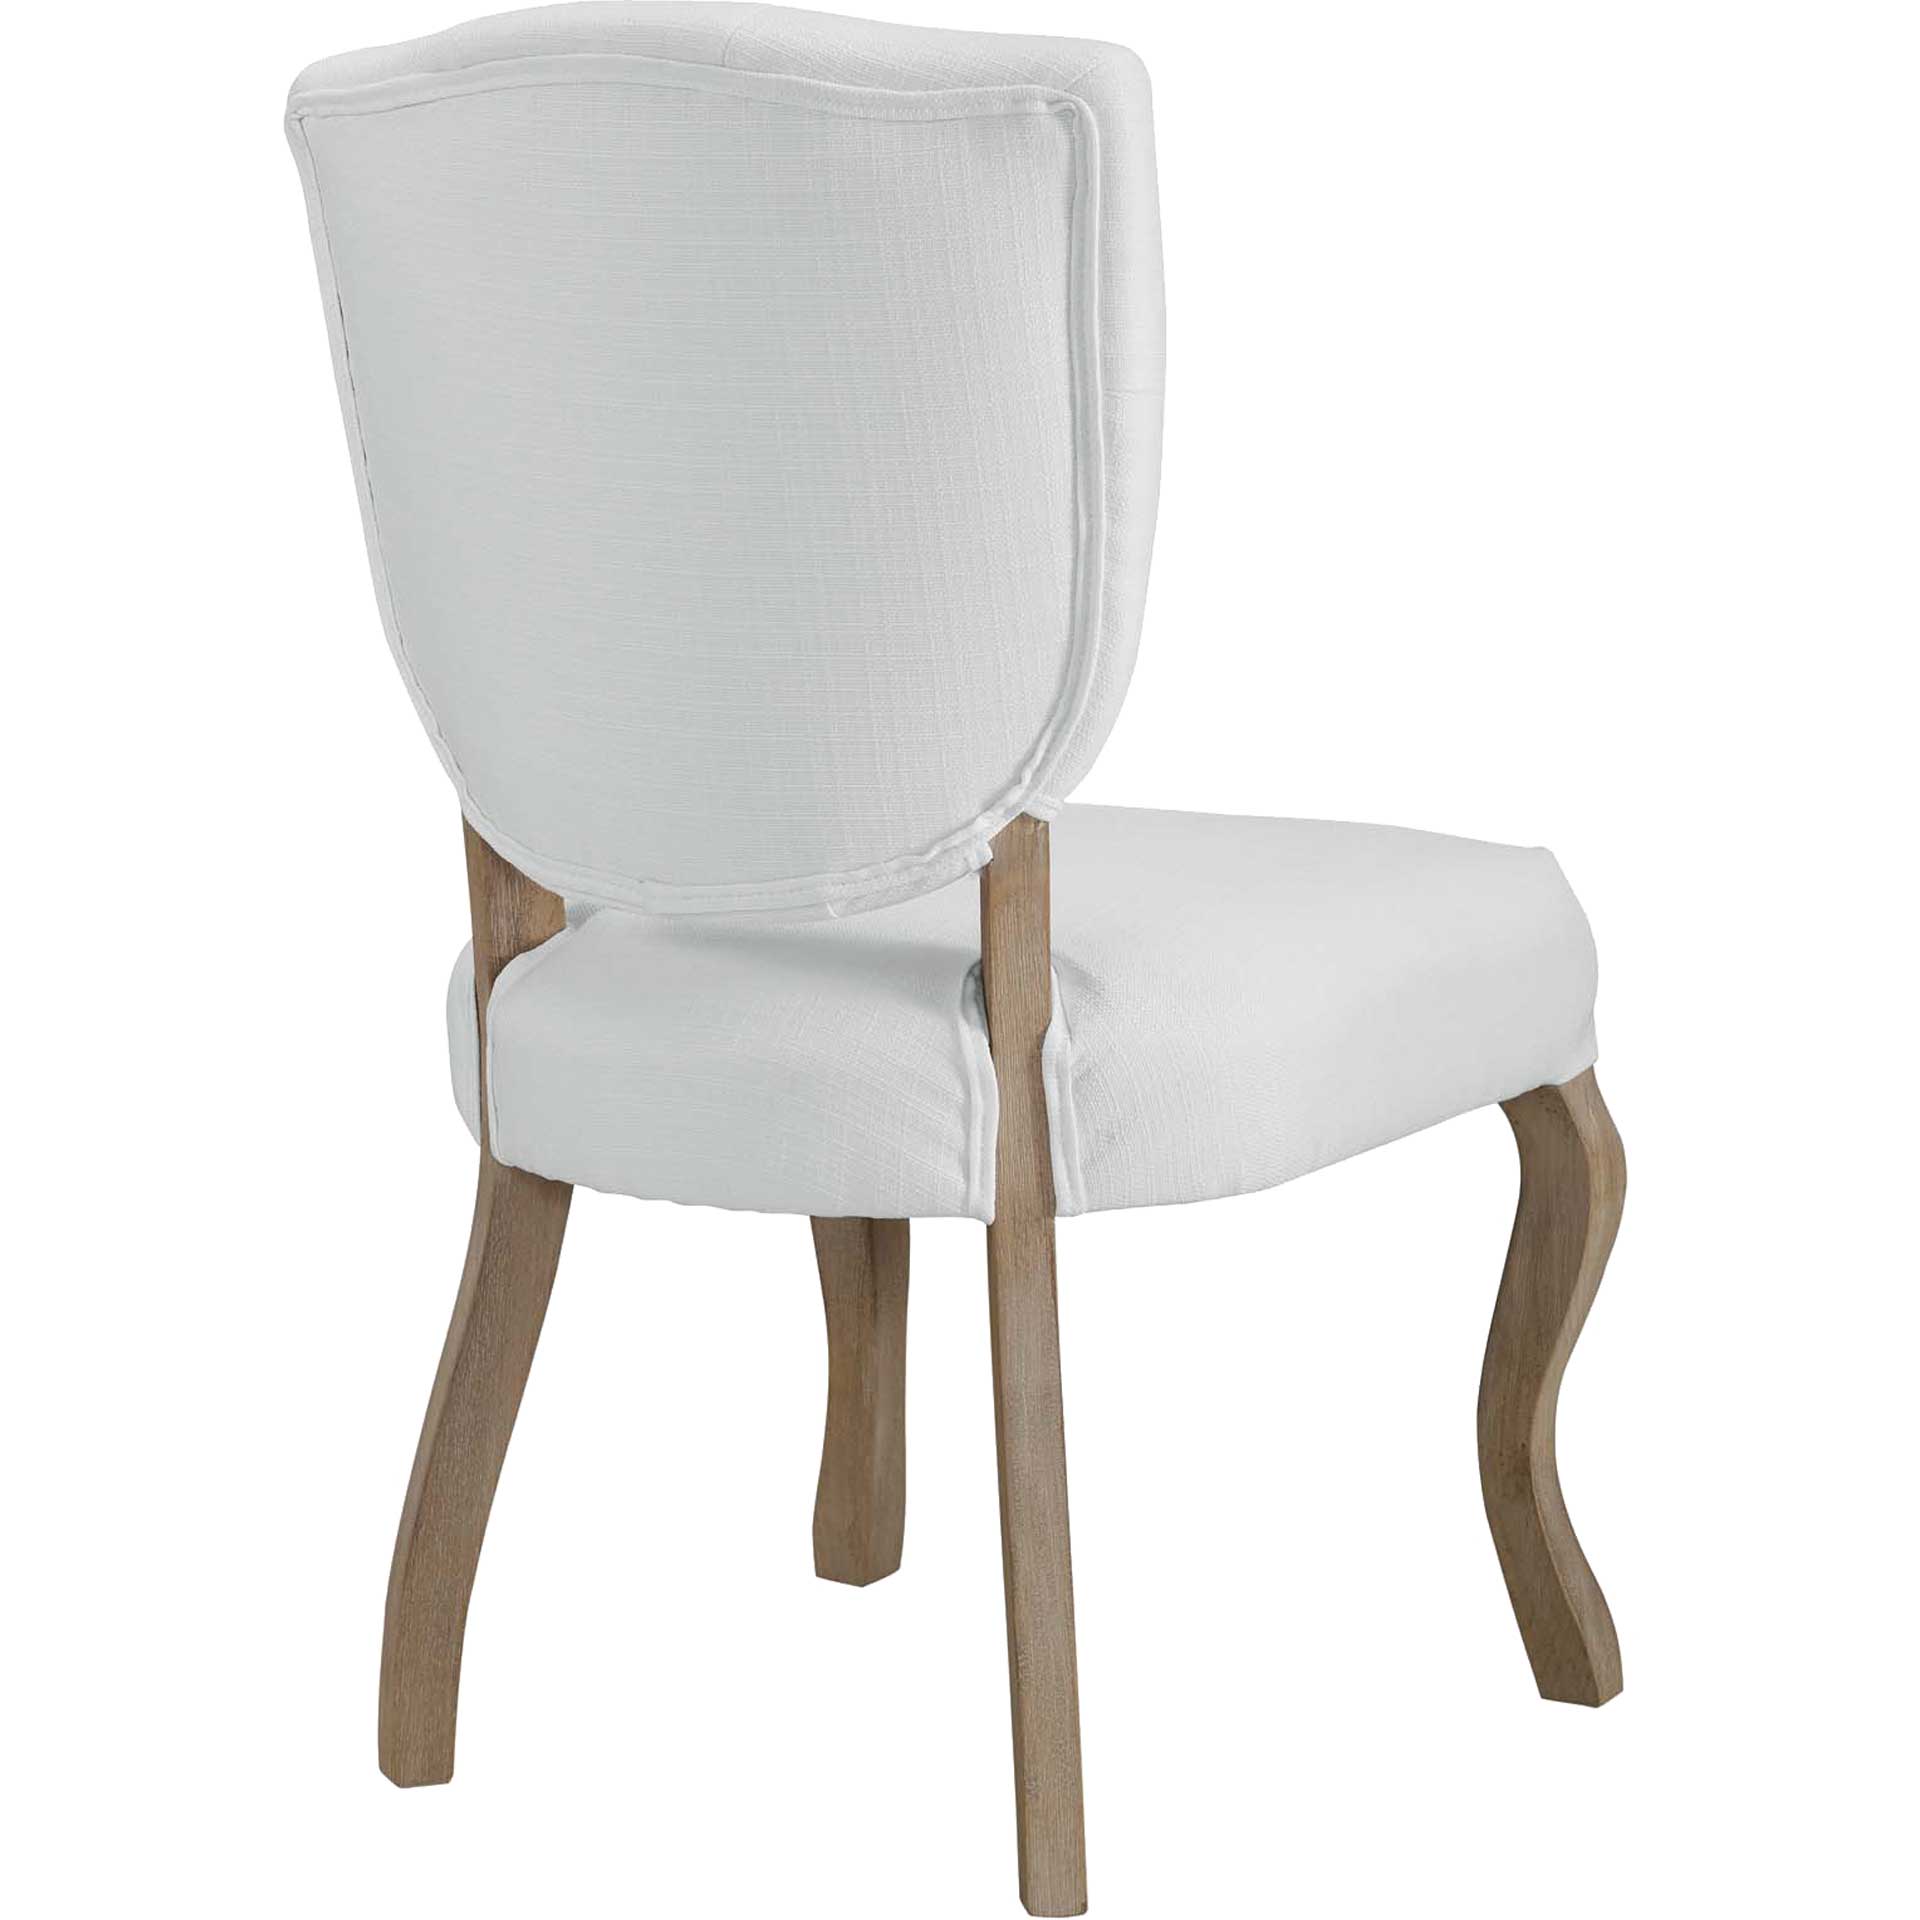 Angie Upholstered Dining Side Chair White